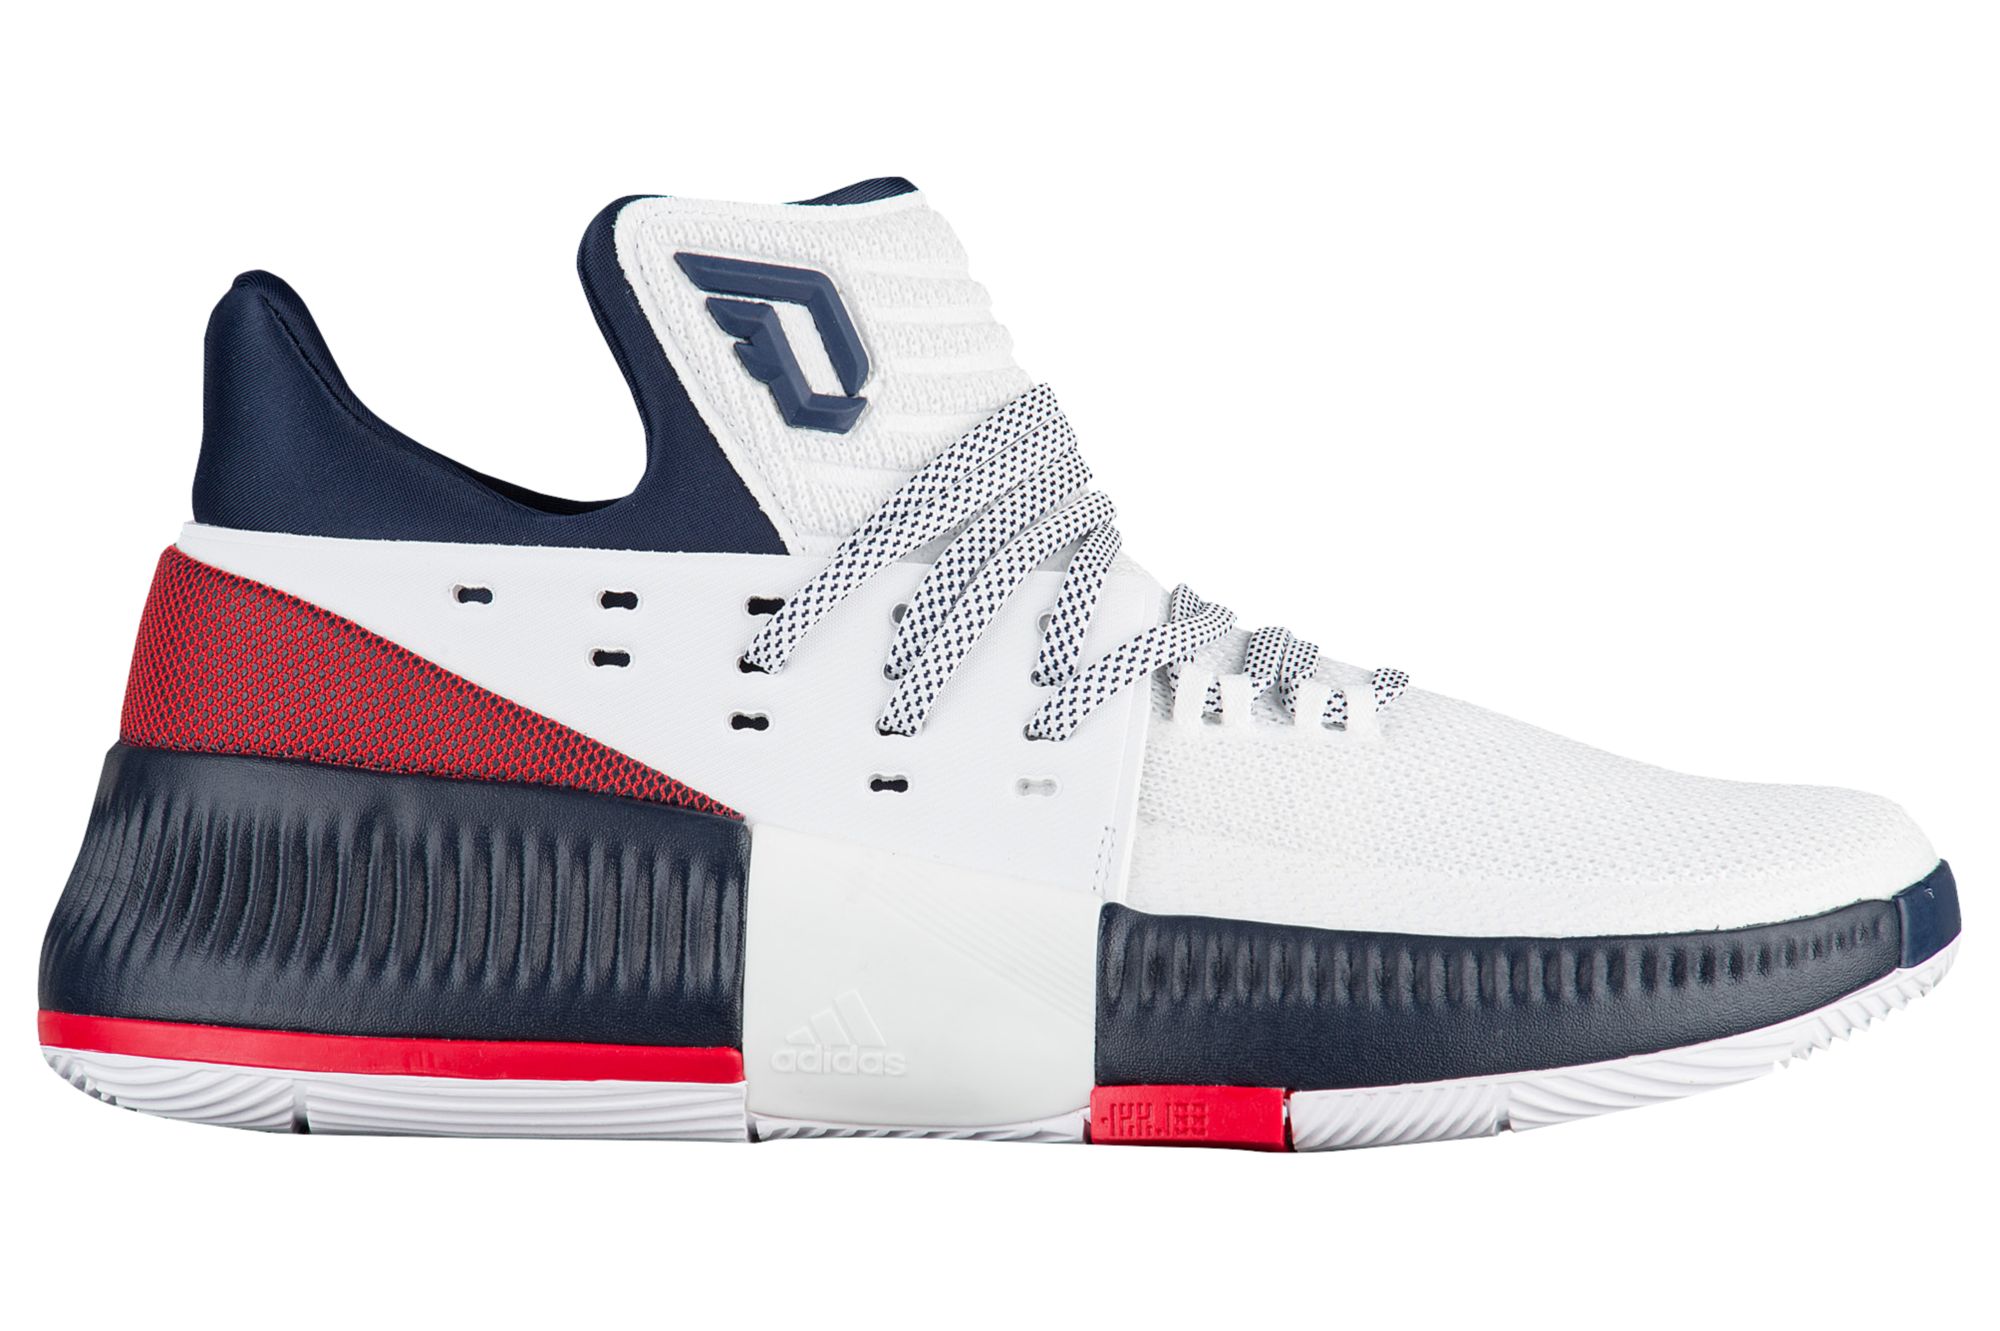 A Red, White, and Blue adidas Dame 3 